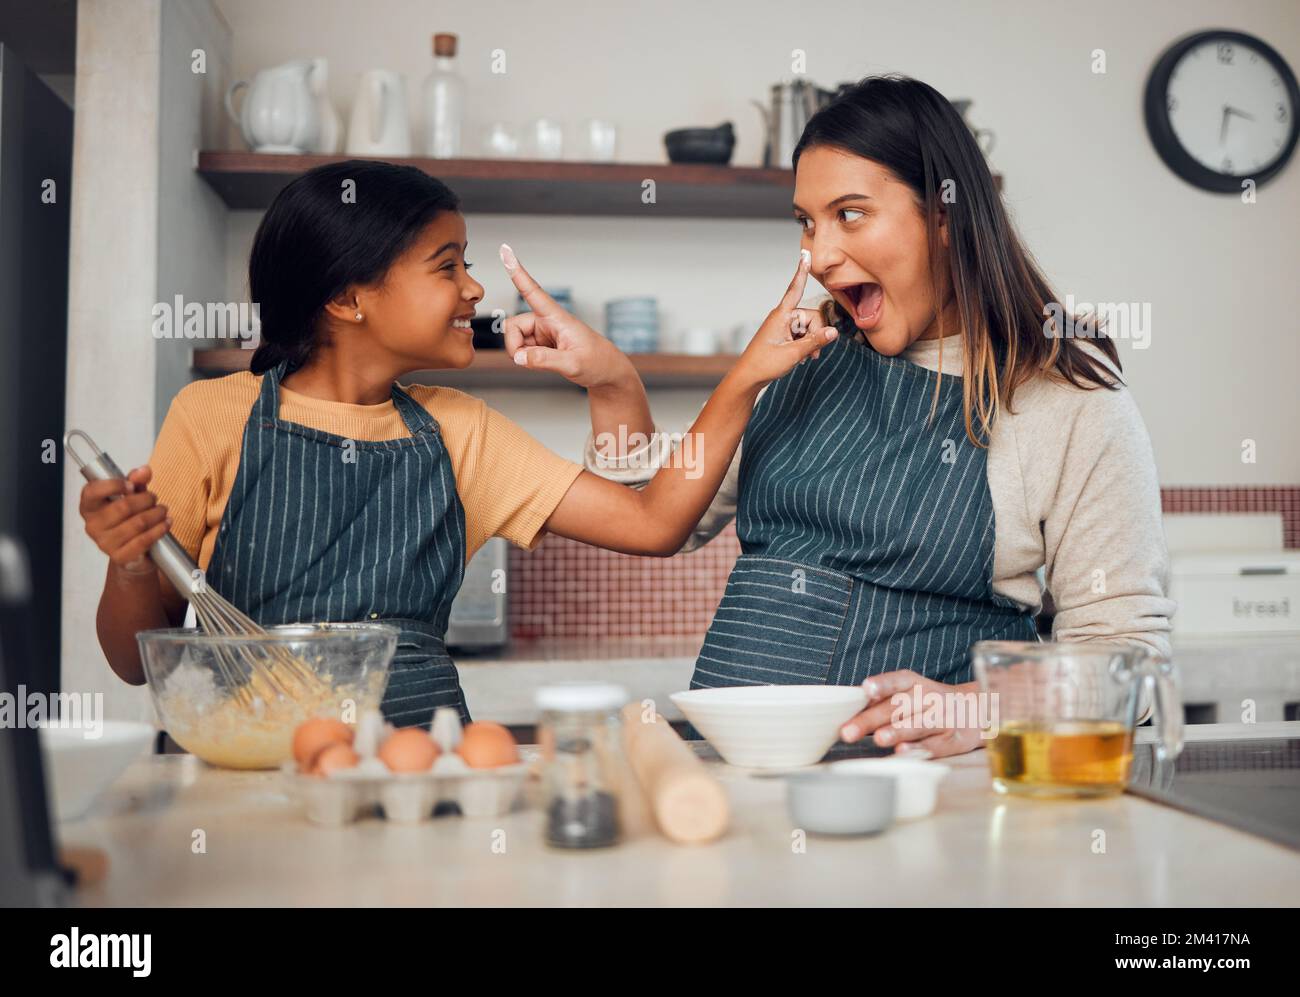 Baking, family and children with a mother and daughter learning hot to bake while being playful in the kitchen. Fun, kids and food with a girl and Stock Photo